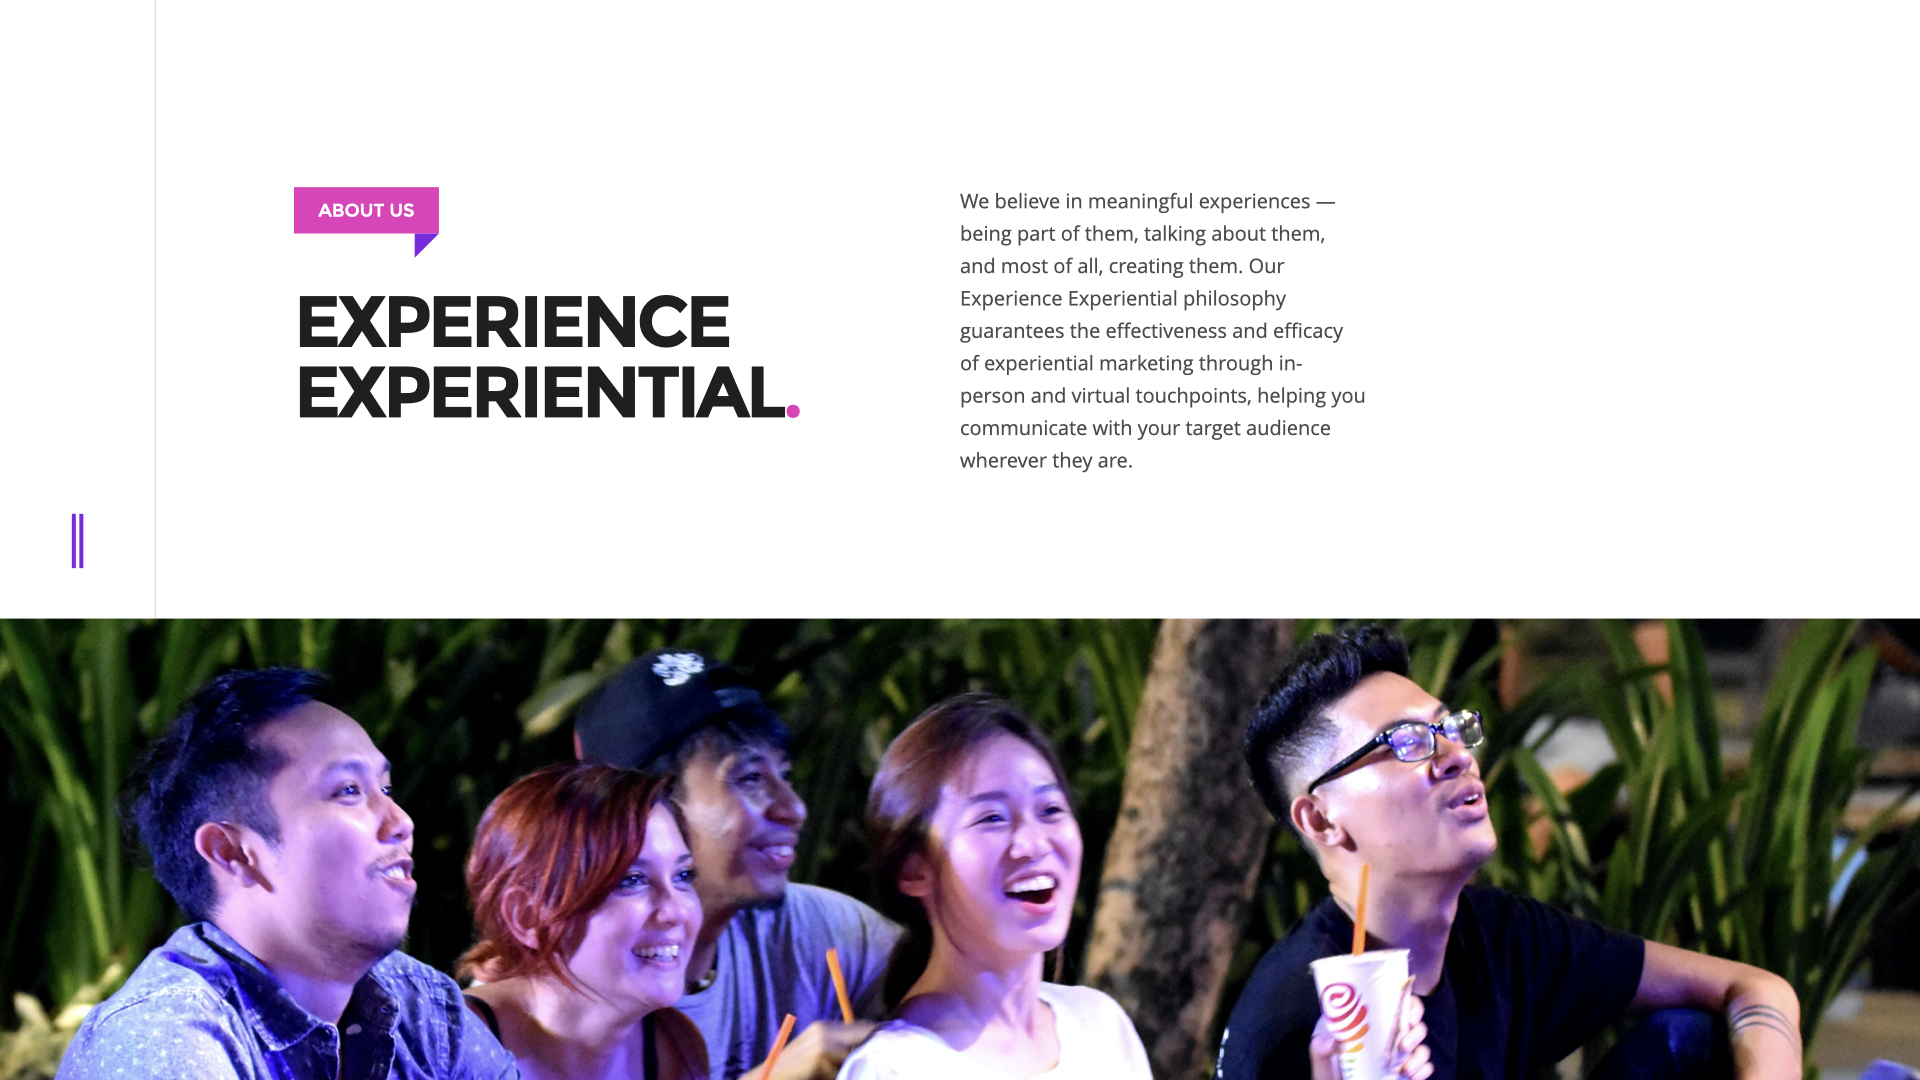 About Us - Experience Experiential